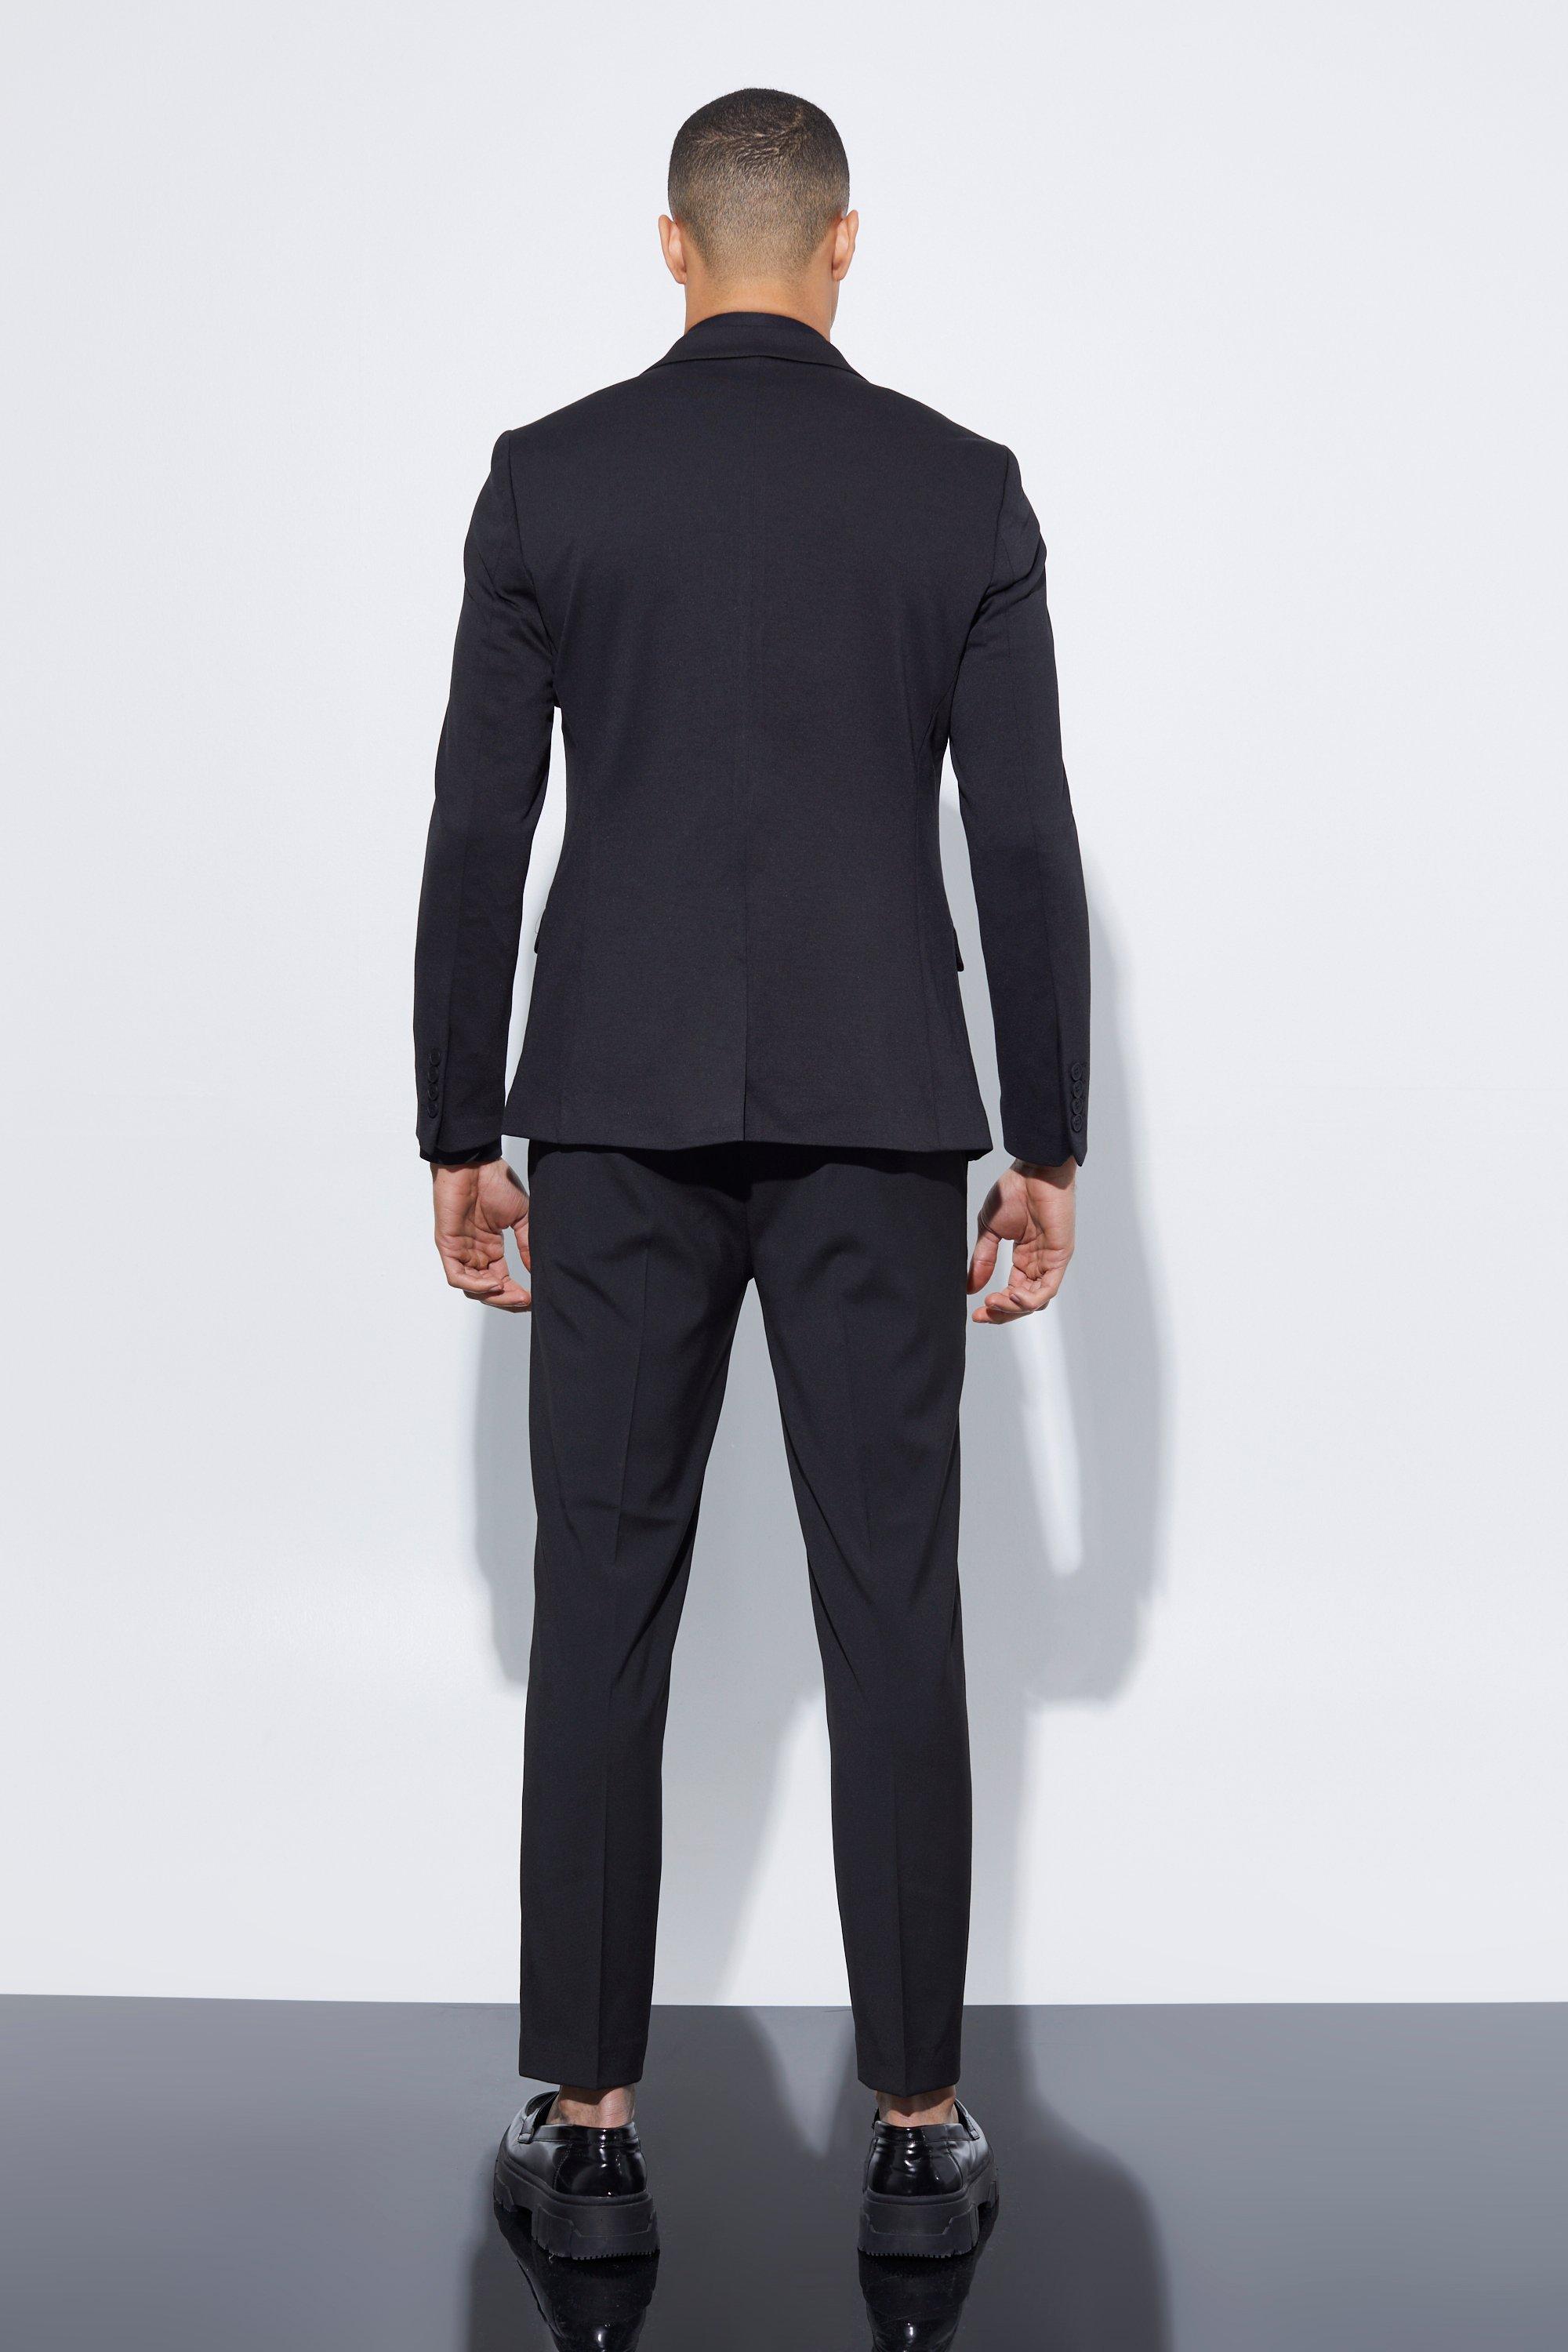 Skinny Fit Cropped Suit Pants